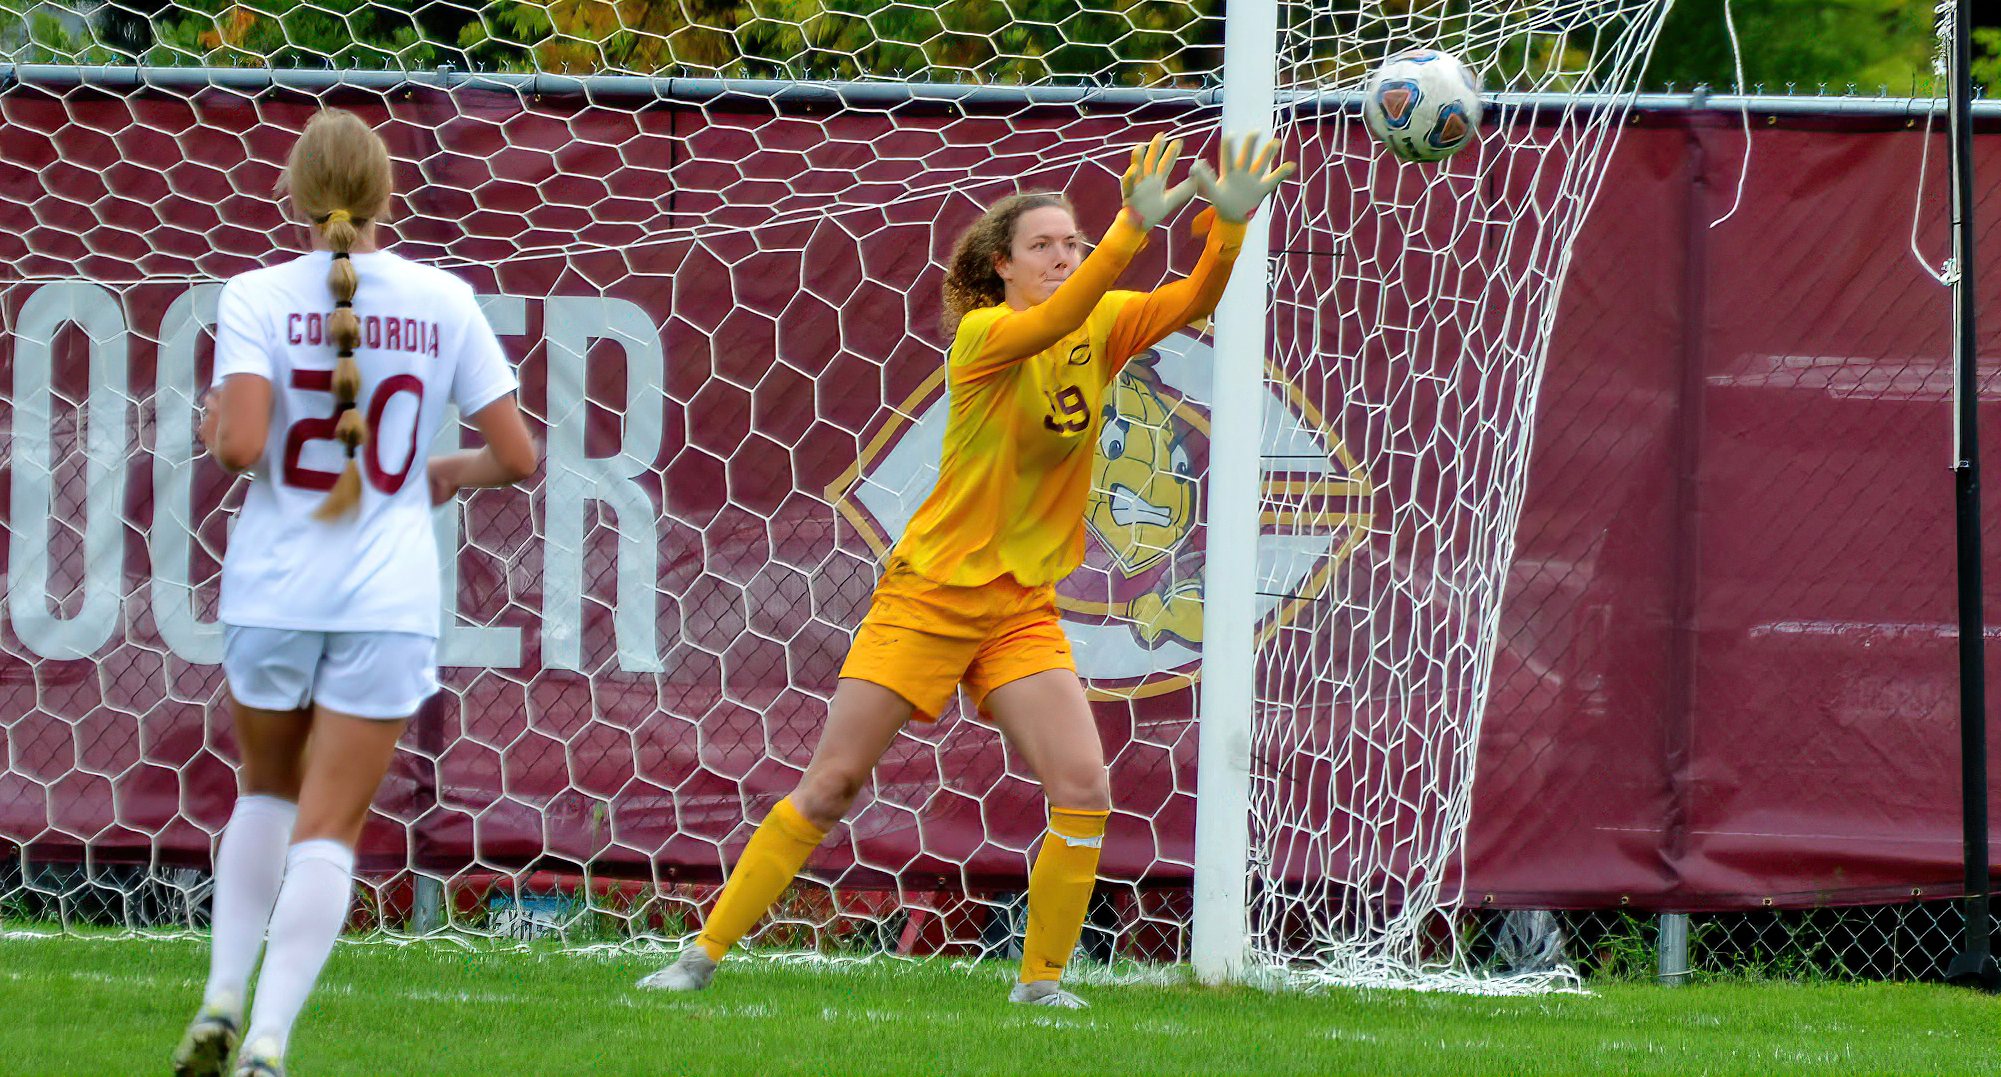 Junior goalie Kaitlin Petrich made eight saves and held nationally-ranked Loras to a single goal in the season opener for the Cobbers.